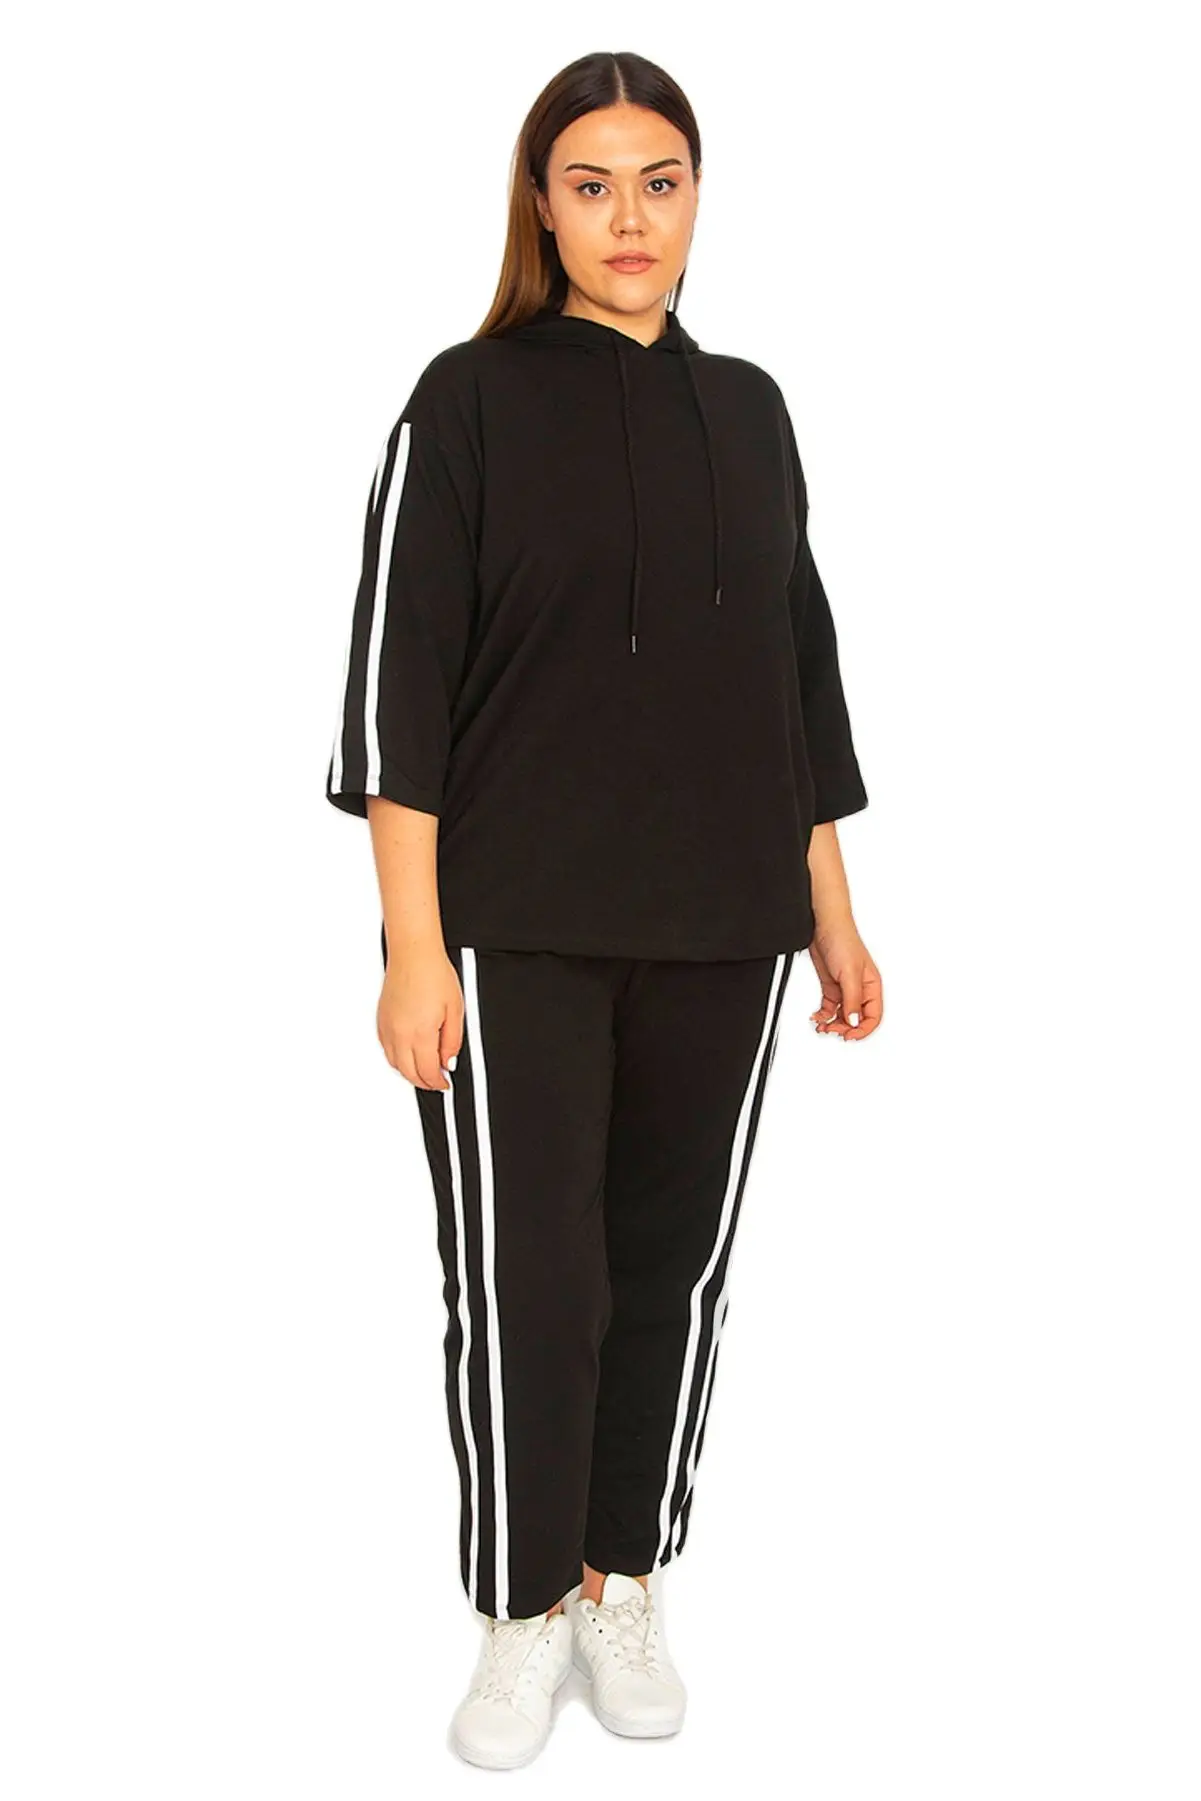 Women’s Plus Size Black Sweatsuit Set 2 Piece Double Striped Detail Zipper Tracksuit, Designed and Made in Turkey, New Arrival